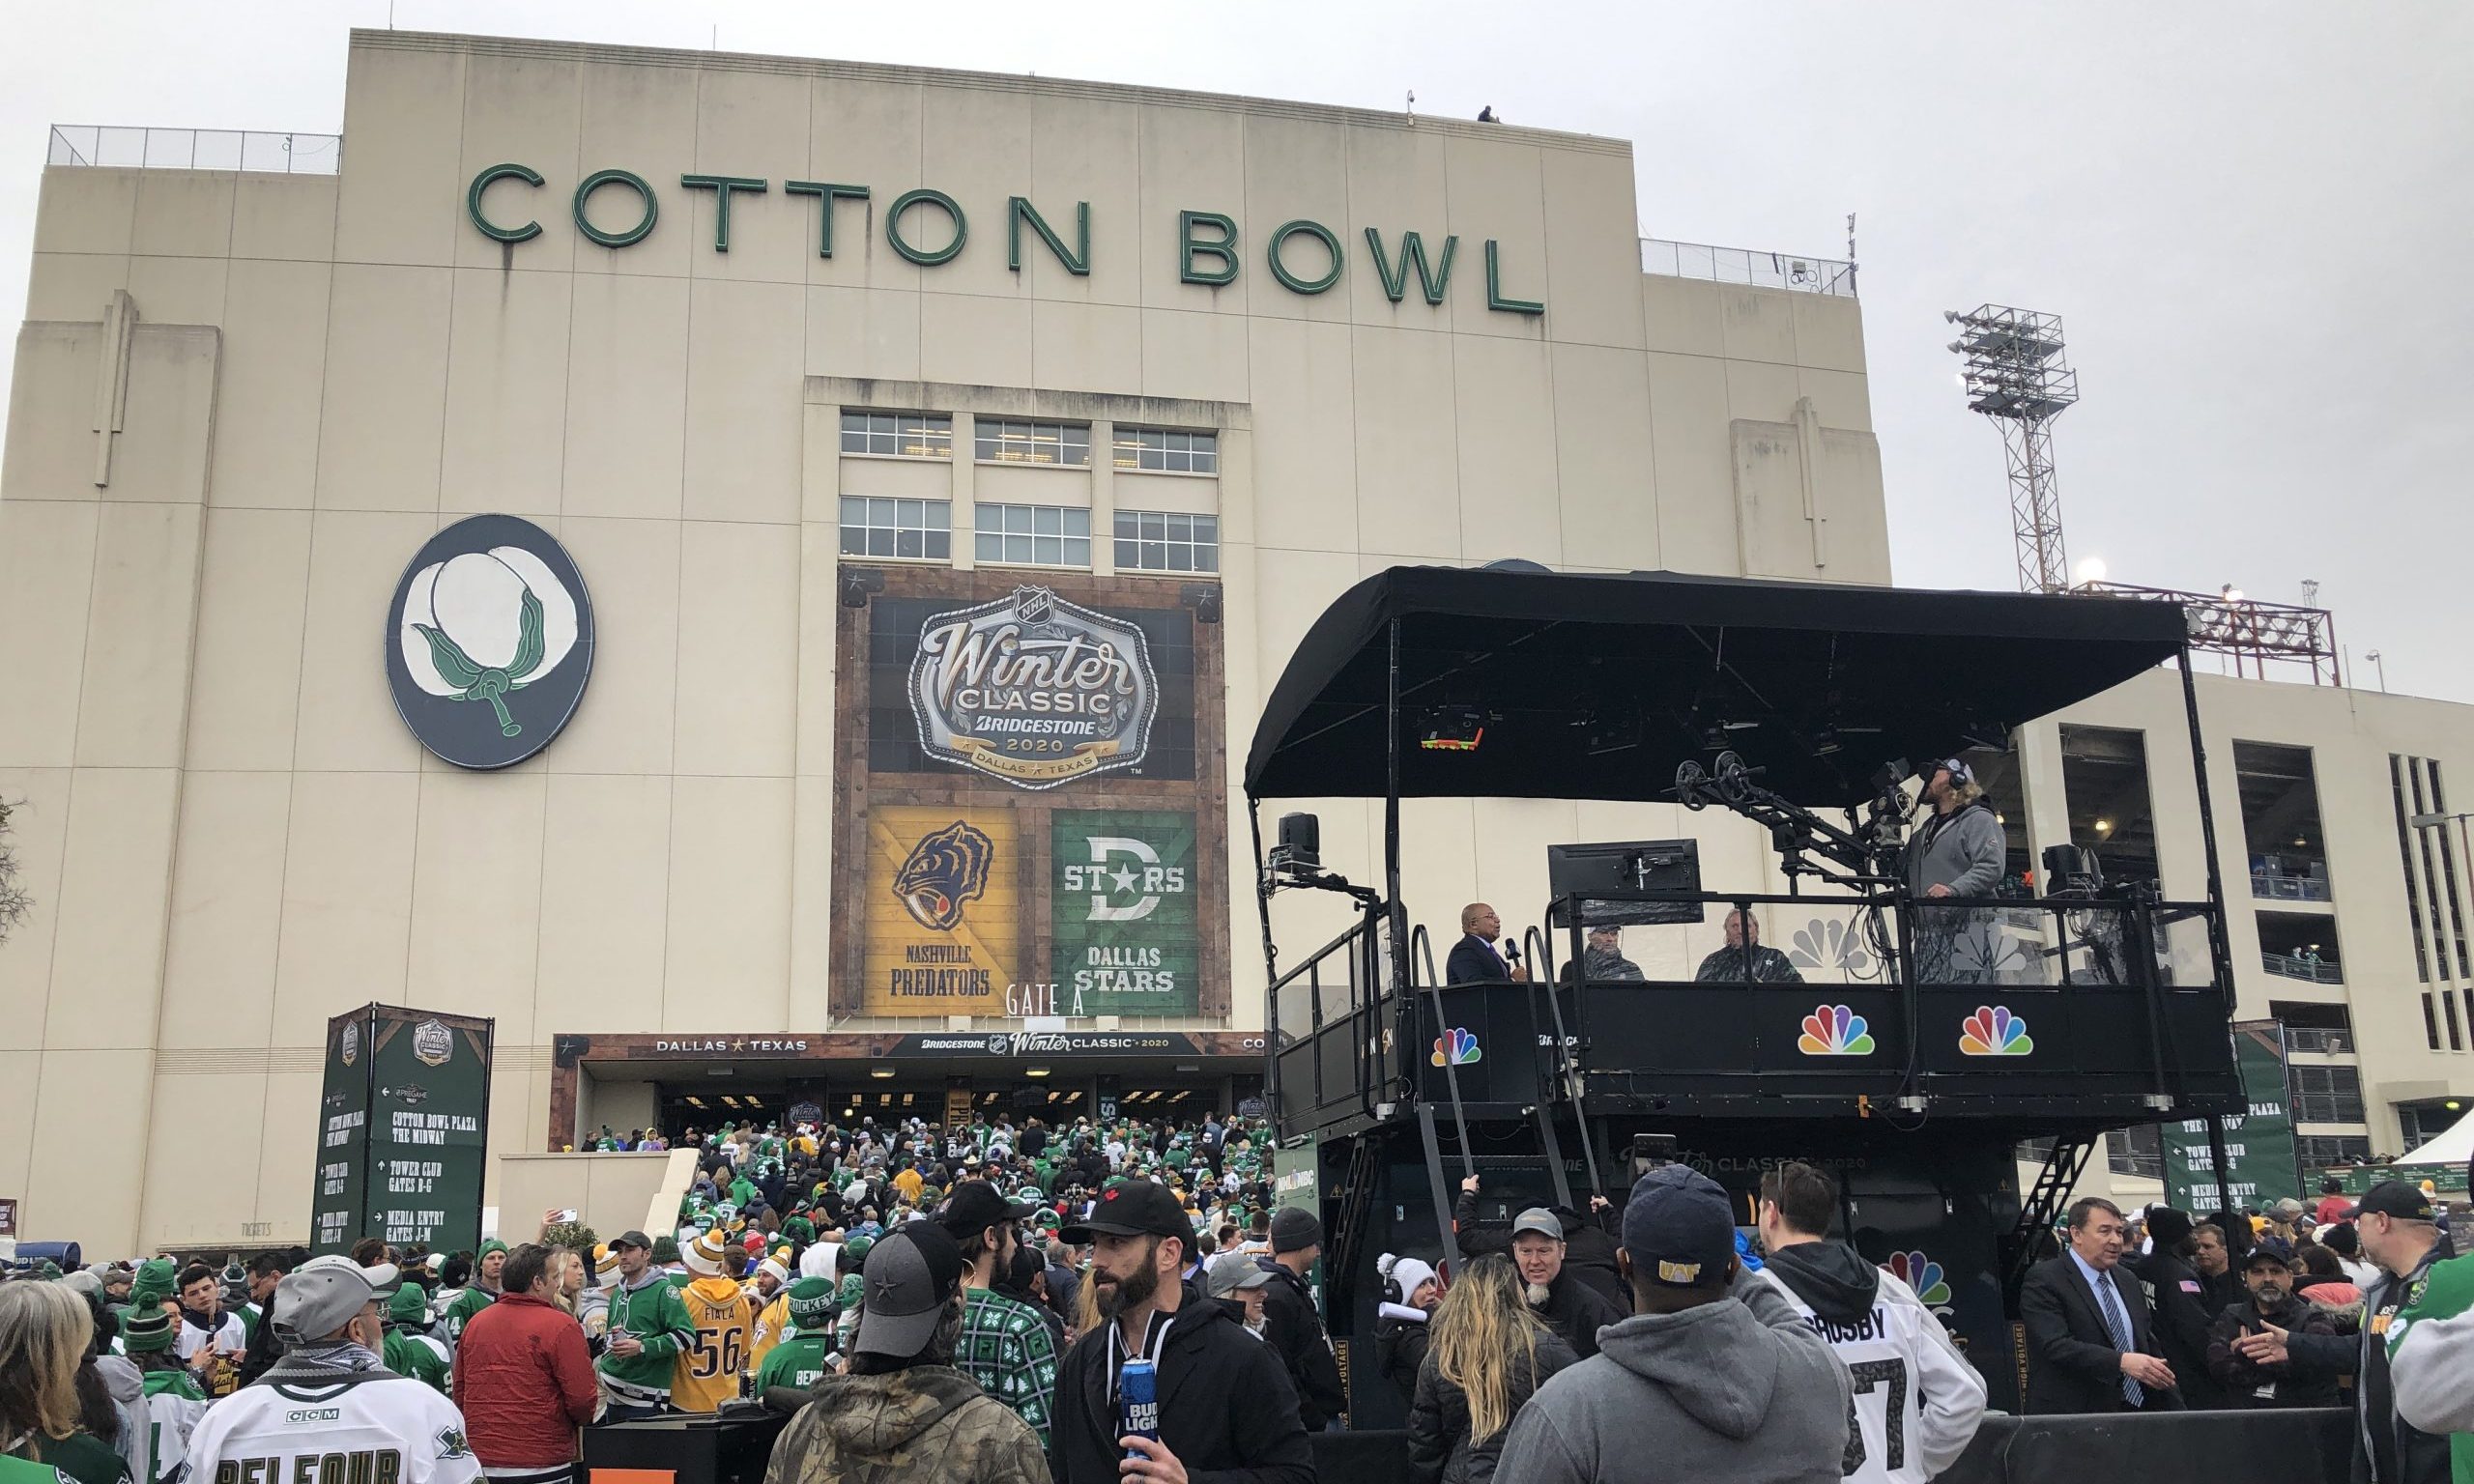 Live From 2020 Winter Classic: NBC Sports Turns Historic Cotton Bowl ...